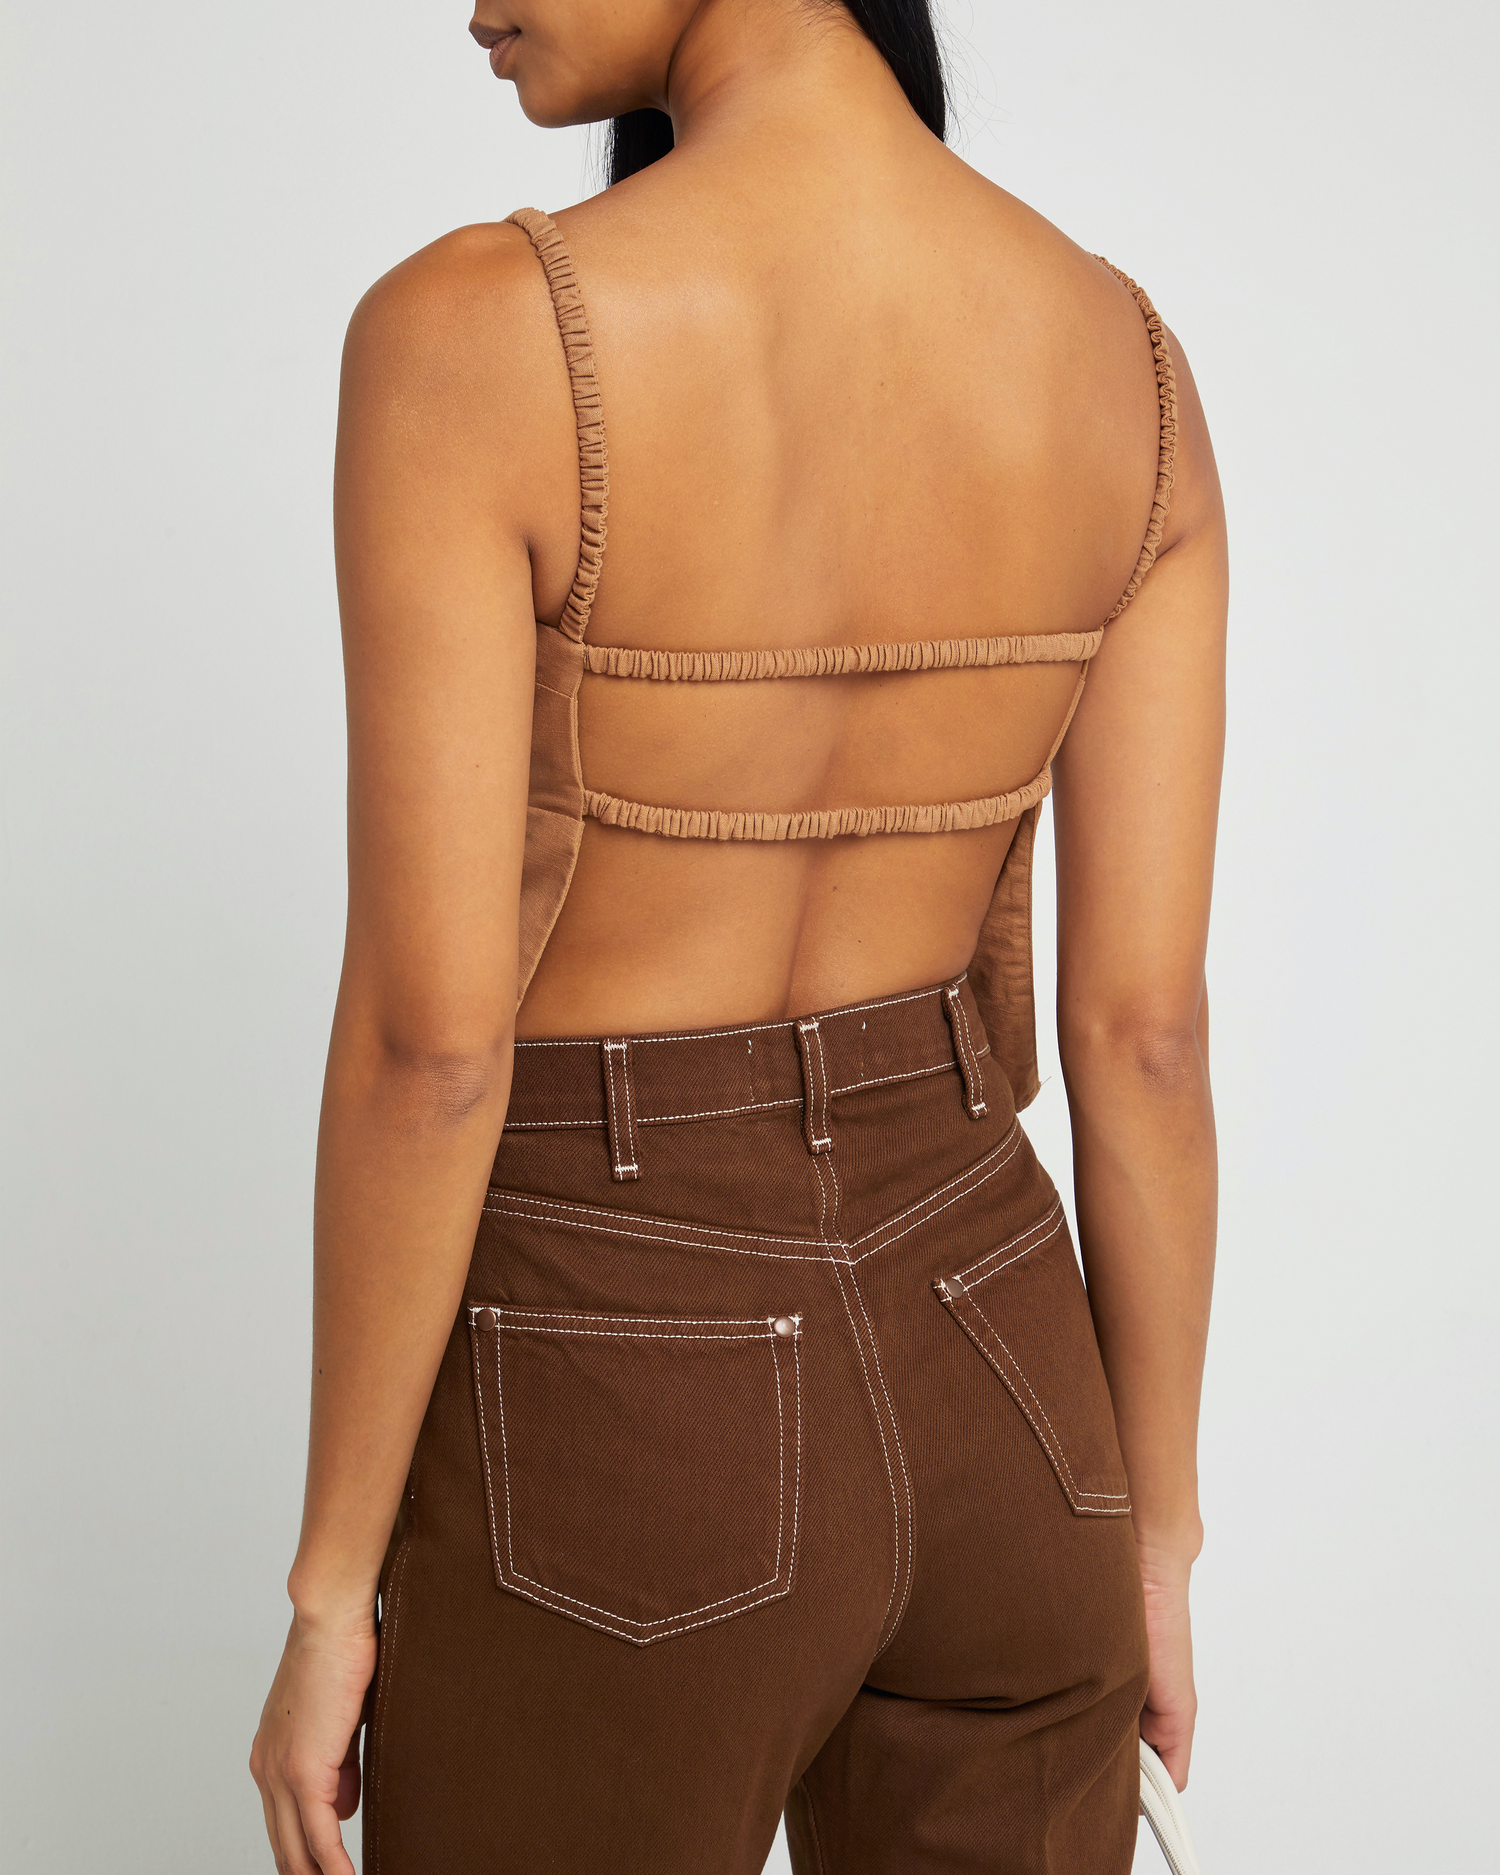 Sixth image of Carina Tank, a brown sleeveless top, open back, two elastic straps across back, thin elastic straps